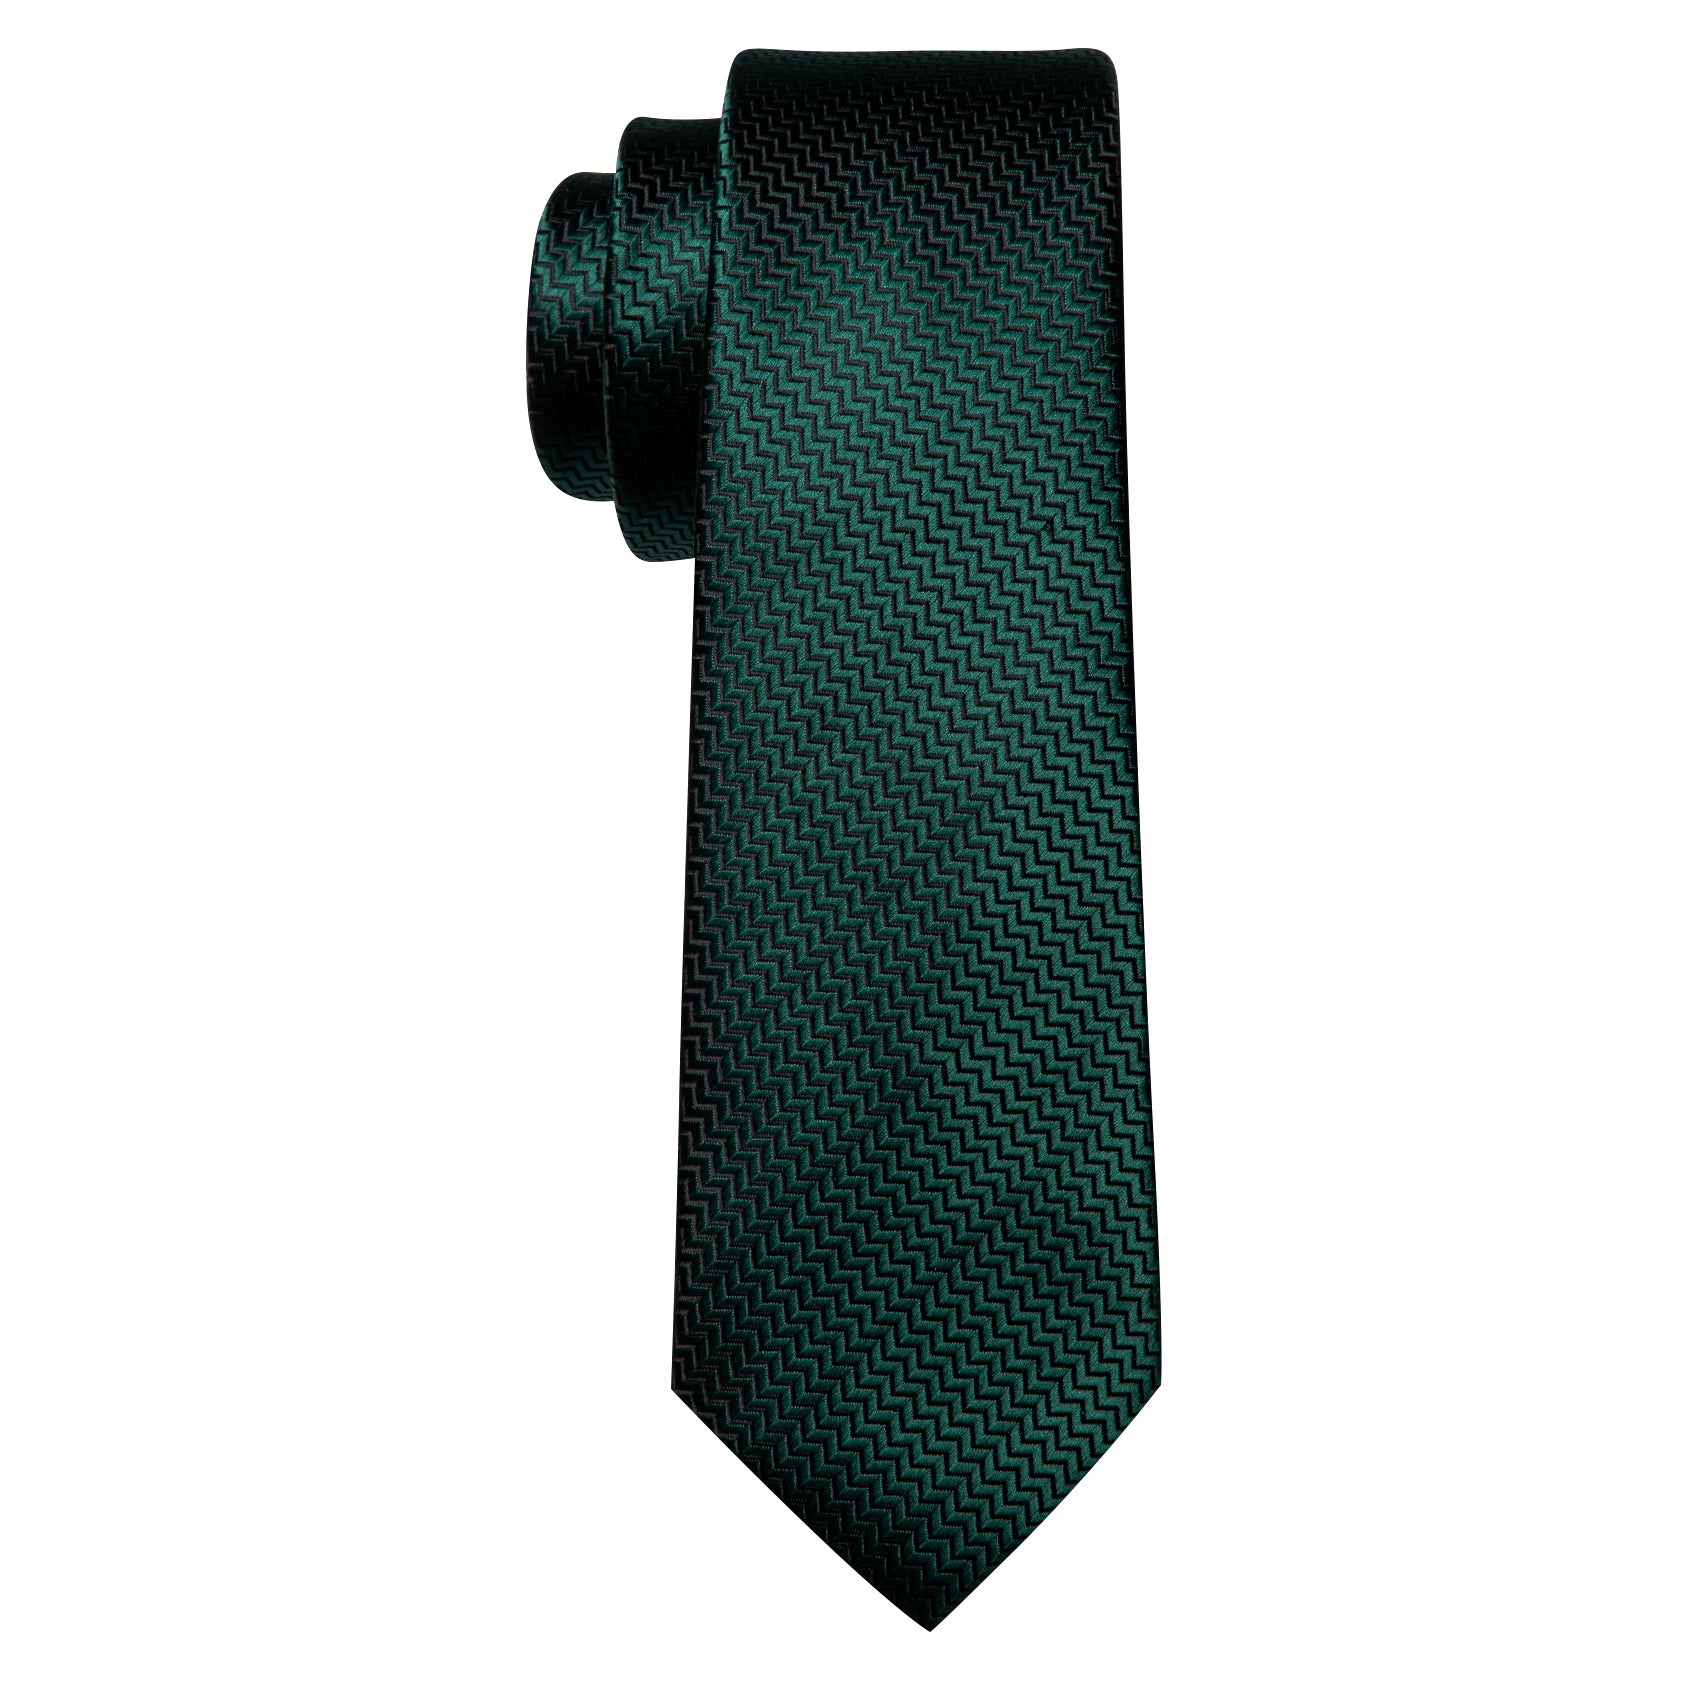 Green Silk 63 Inches Extra Long Tie Pocket Square Cufflinks Set